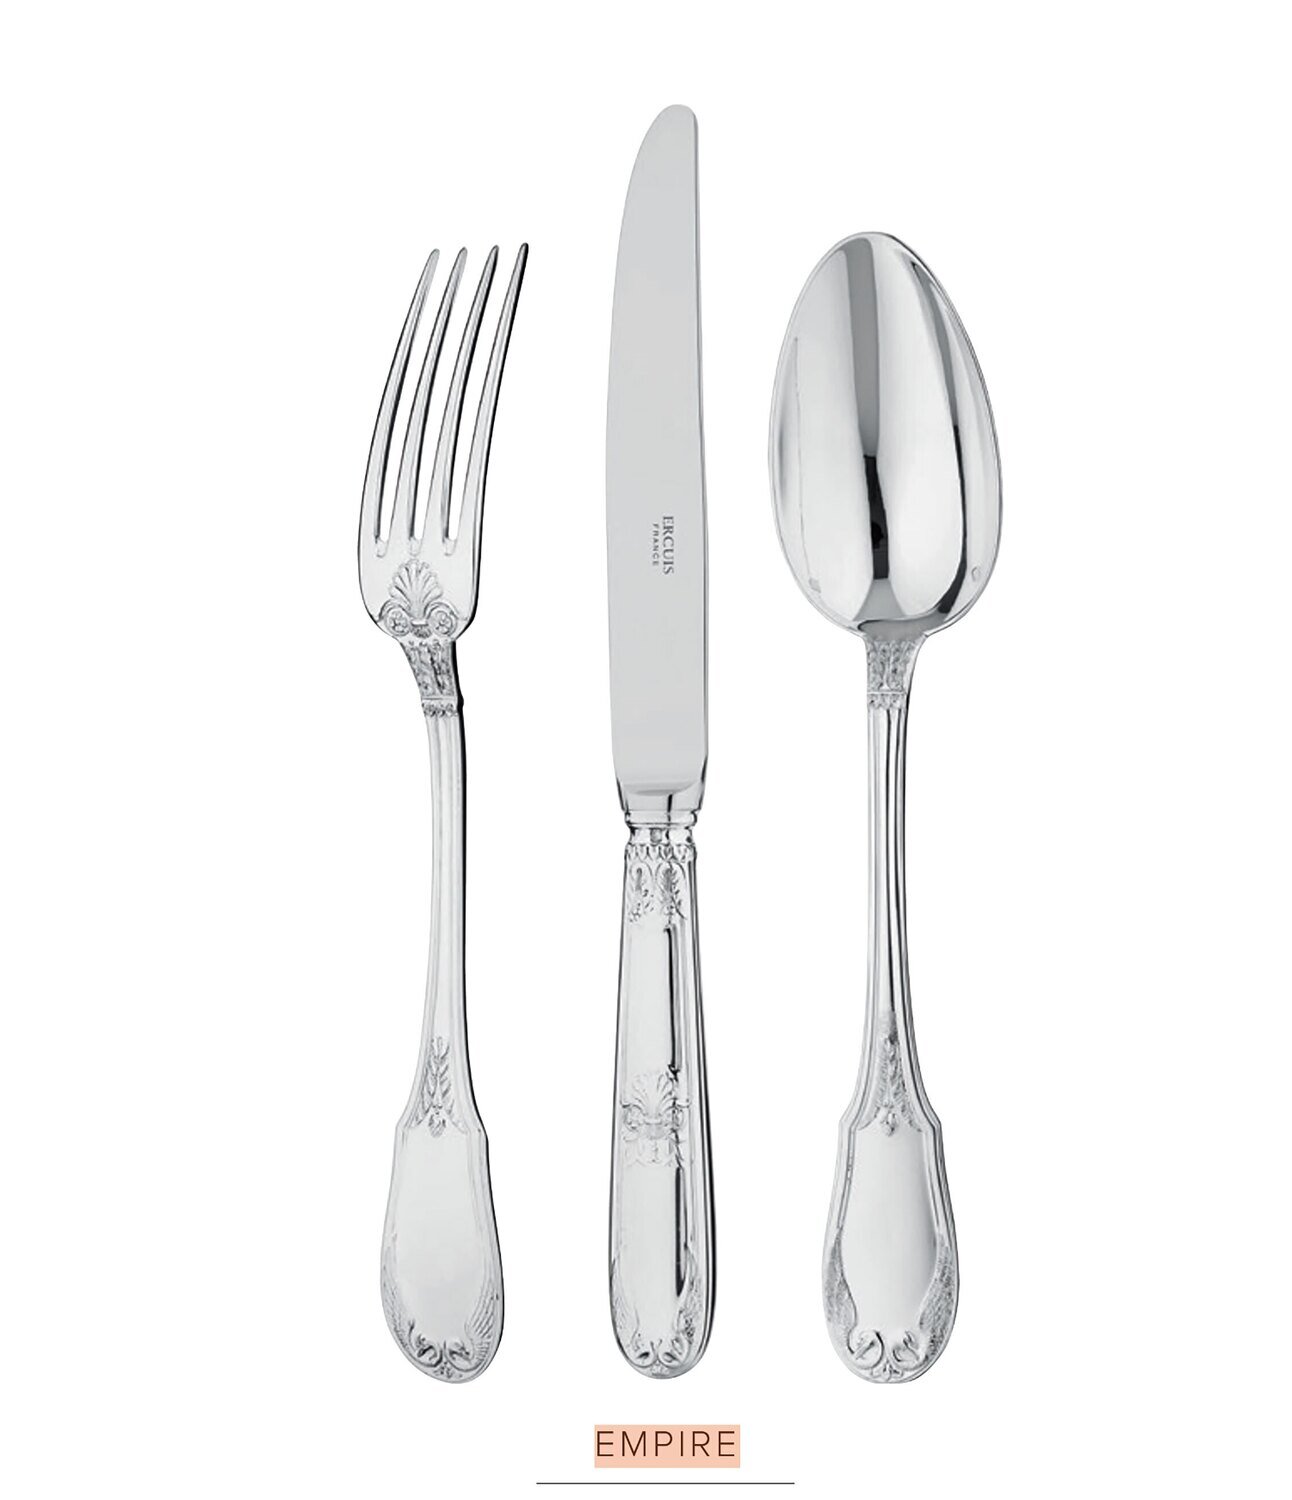 Ercuis Empire 5 Piece Place Setting with Anti-Tarnish Bag Sterling Silver F630490-DF